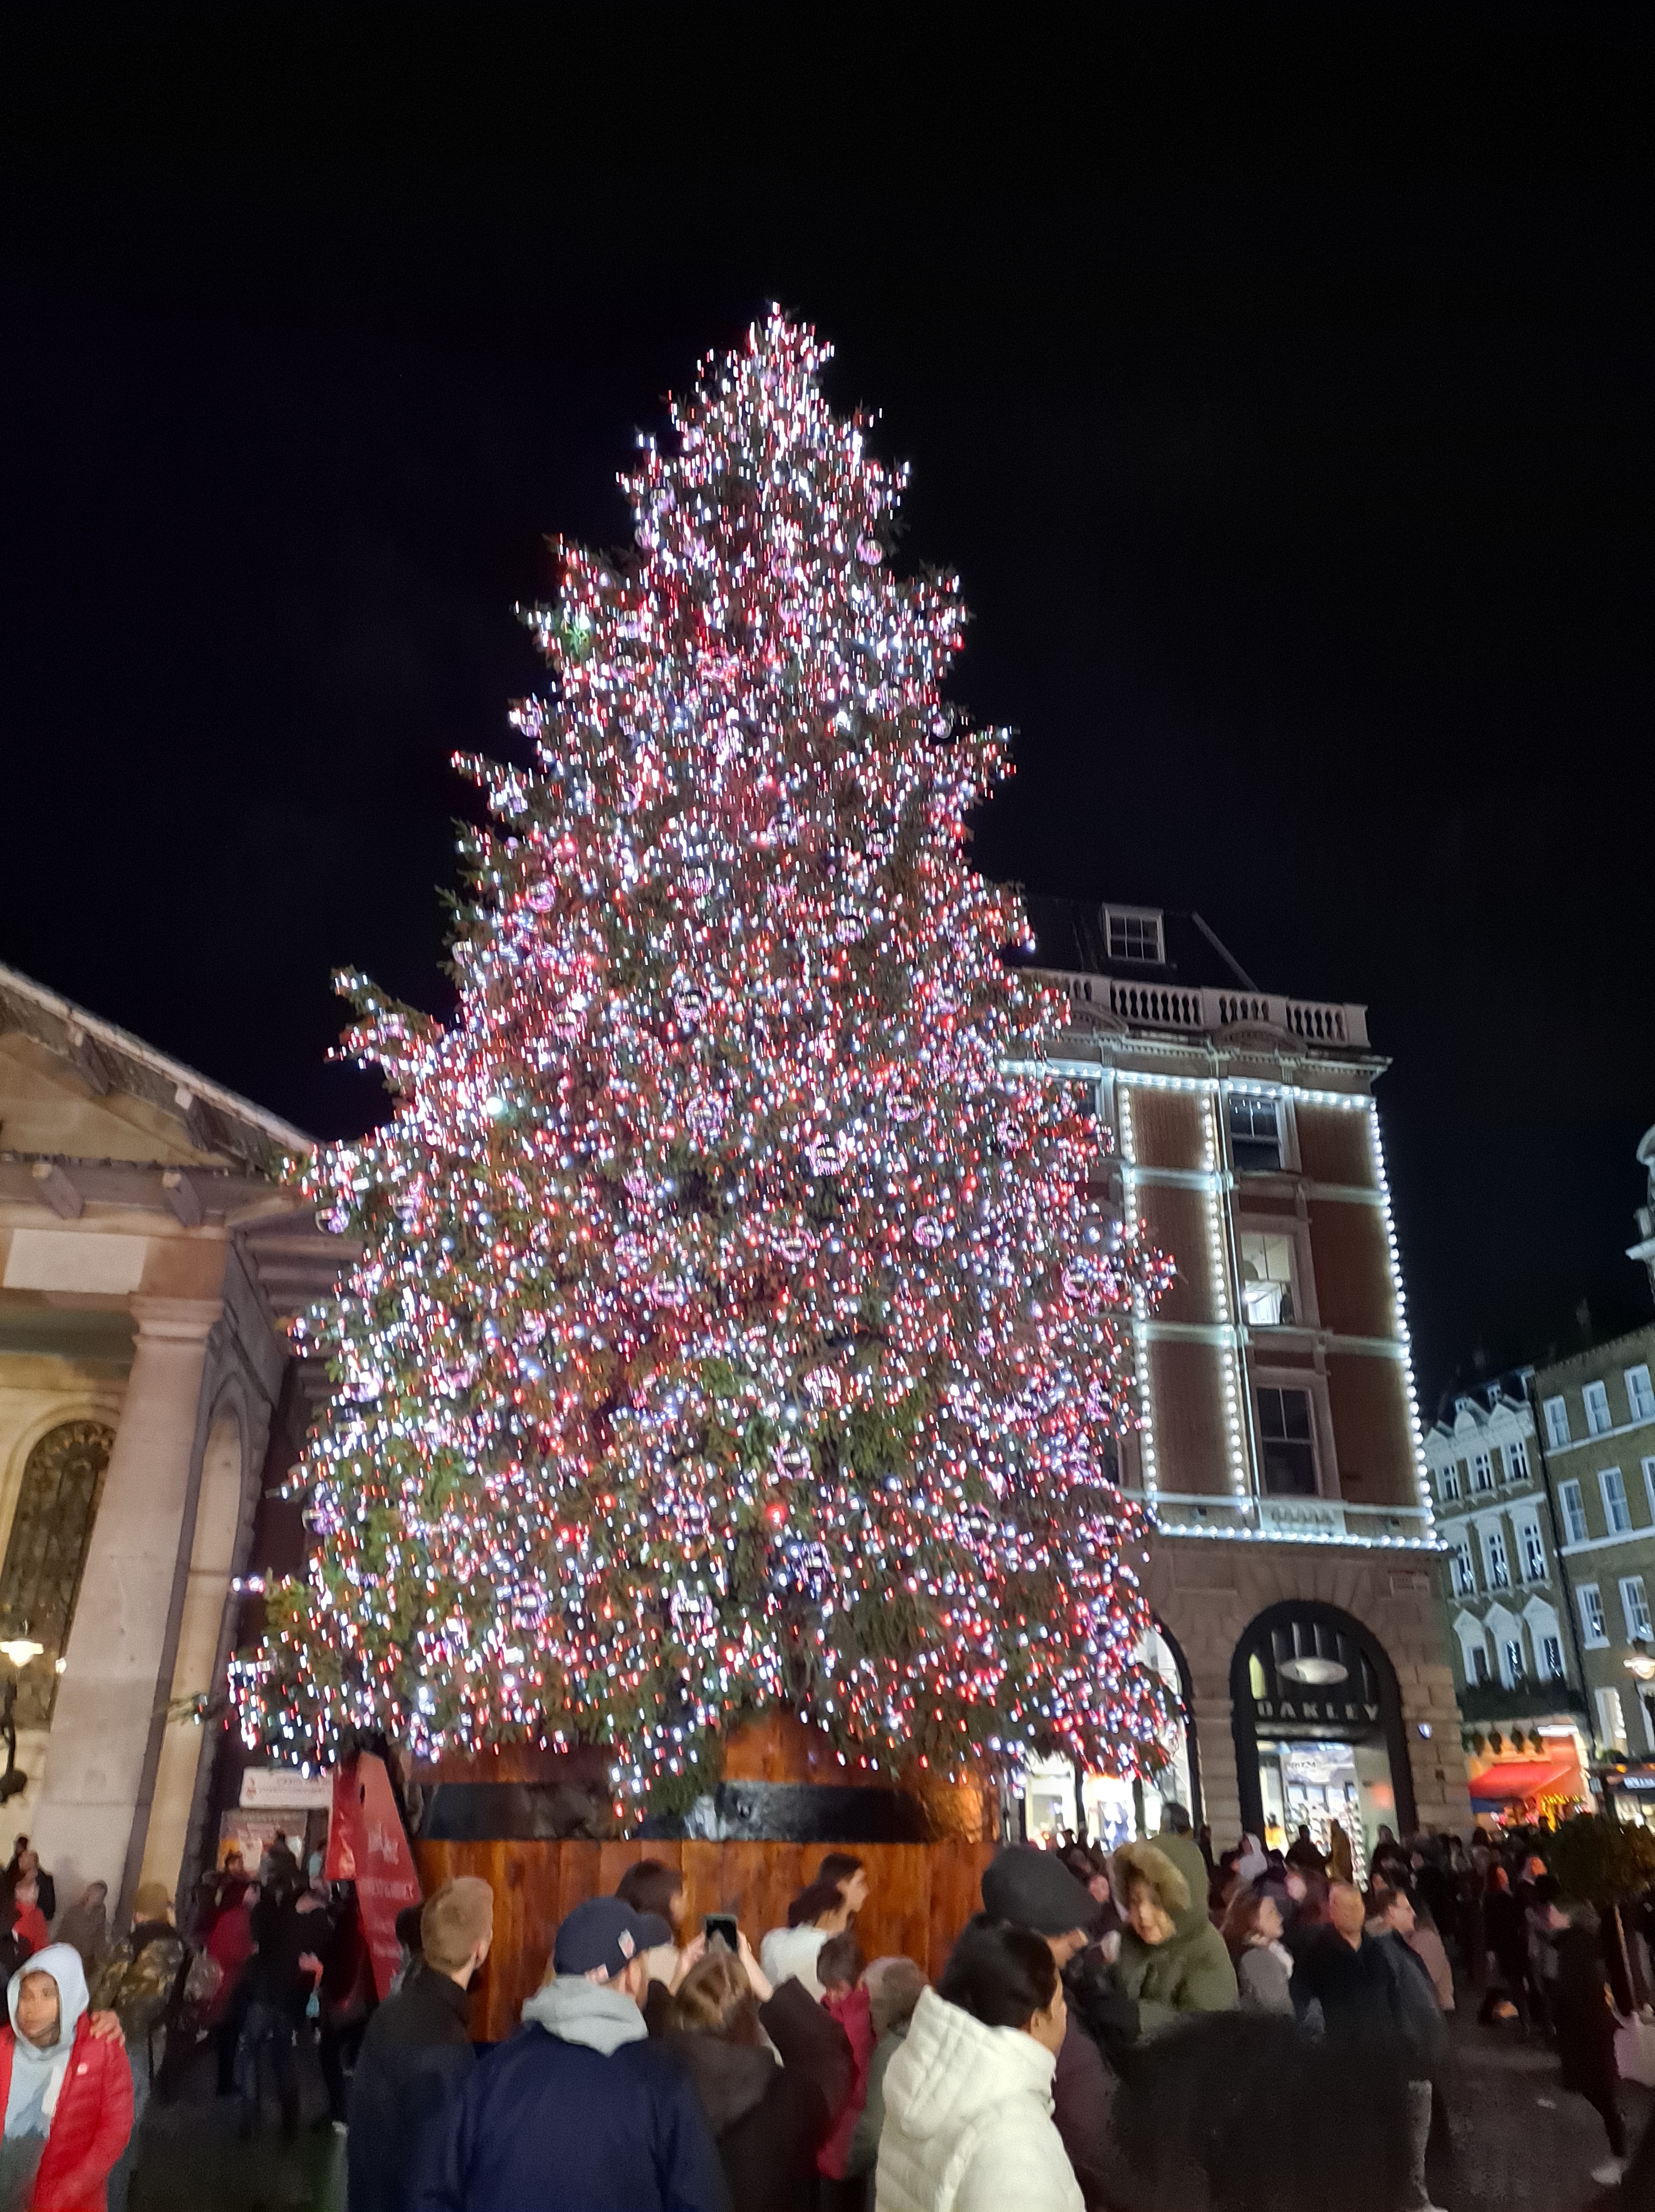 Covent Garden Christmas Tree - photo by Juliamaud